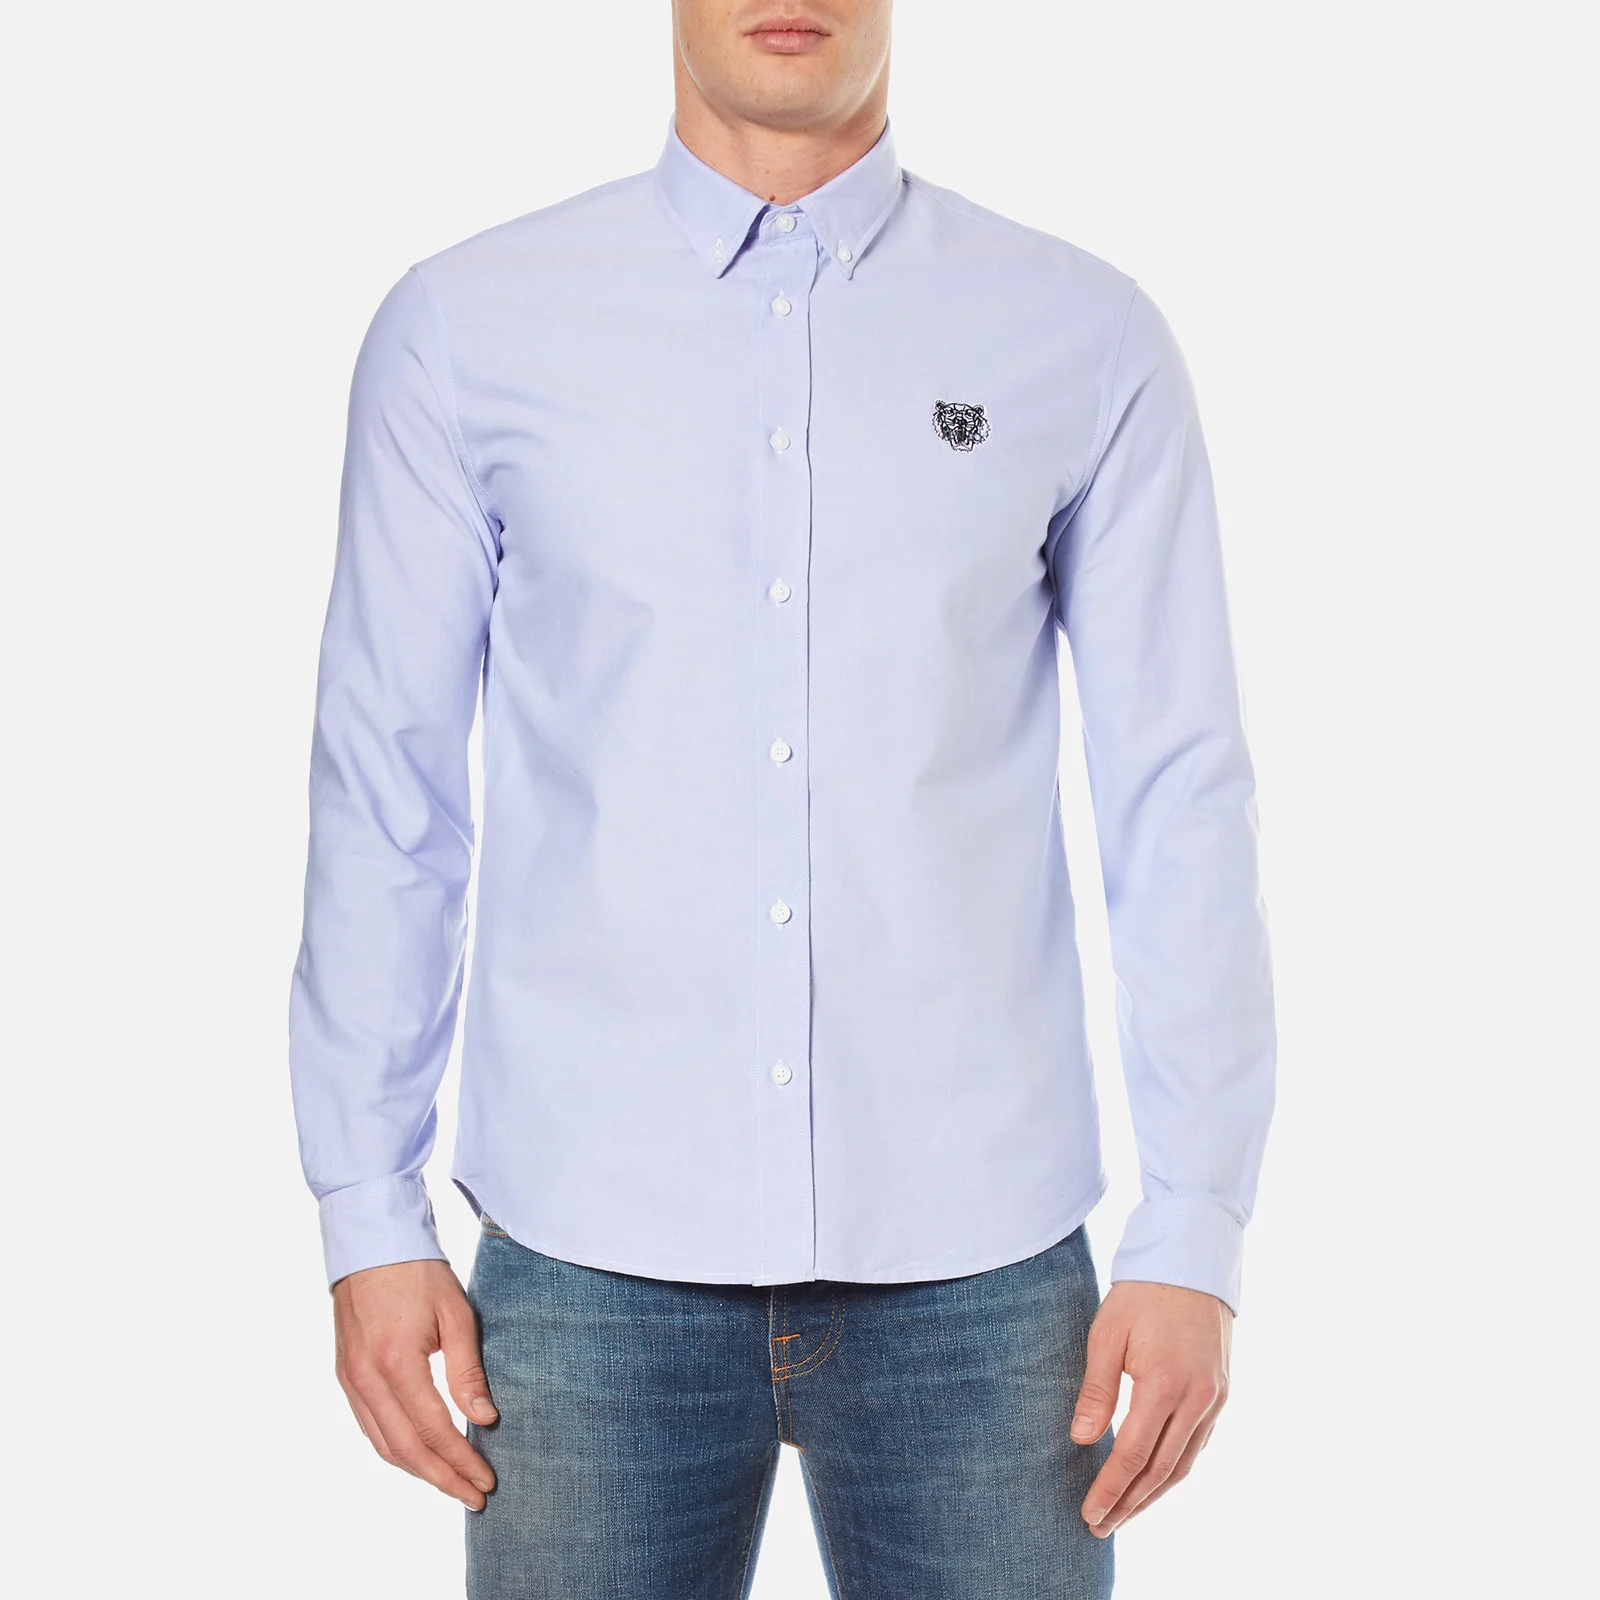 KENZO Men's Casual Fit Oxford Tiger Shirt - Sky Blue Image 1